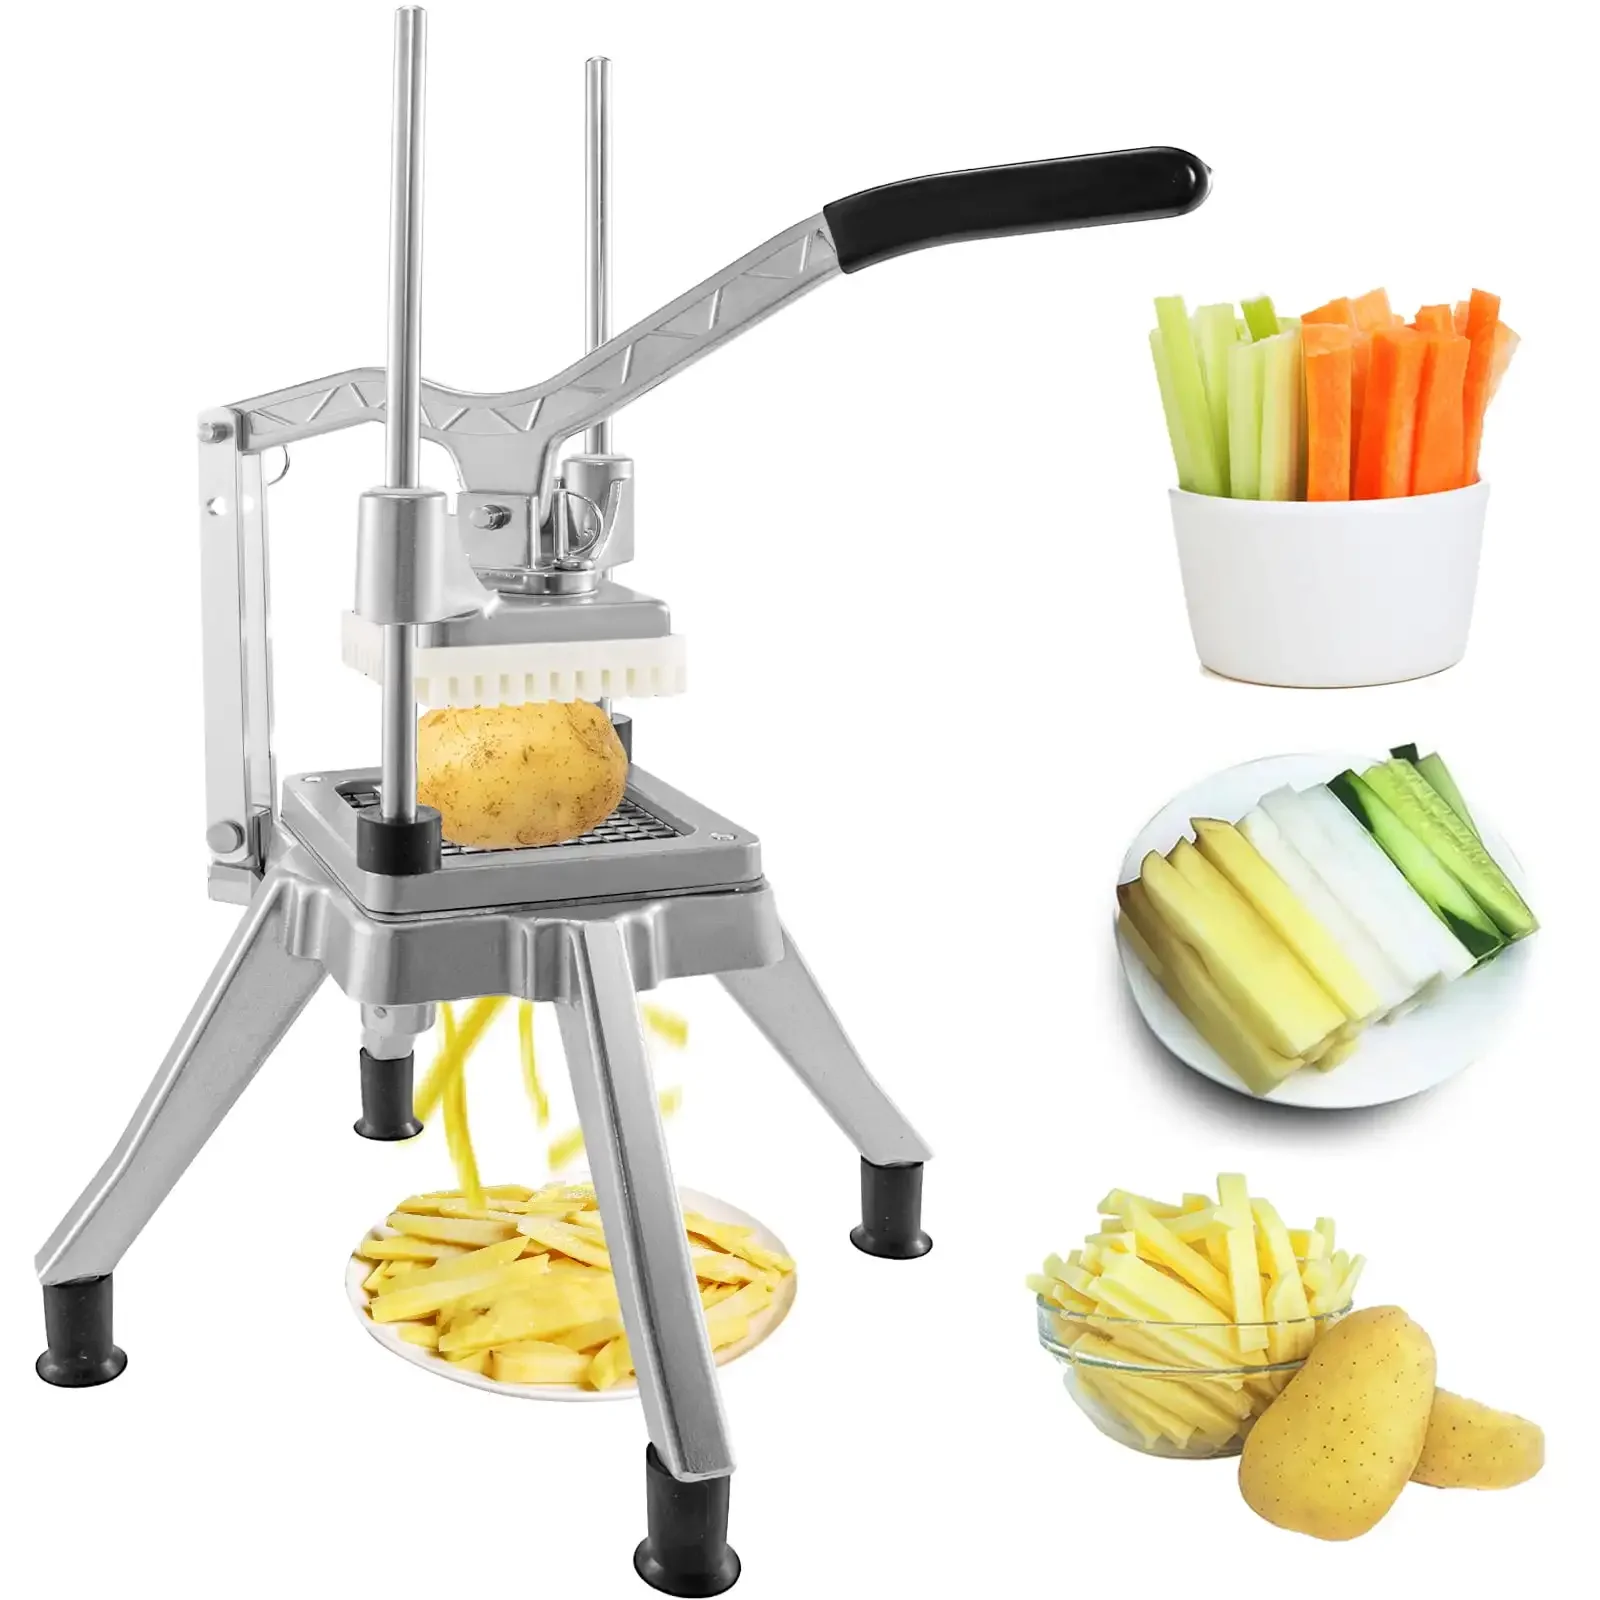 

VEVORbrand Commercial Vegetable Fruit Chopper 3/8in Blade Heavy Duty Professional Food Dicer Kattex French Fry Cutter Onion Slic